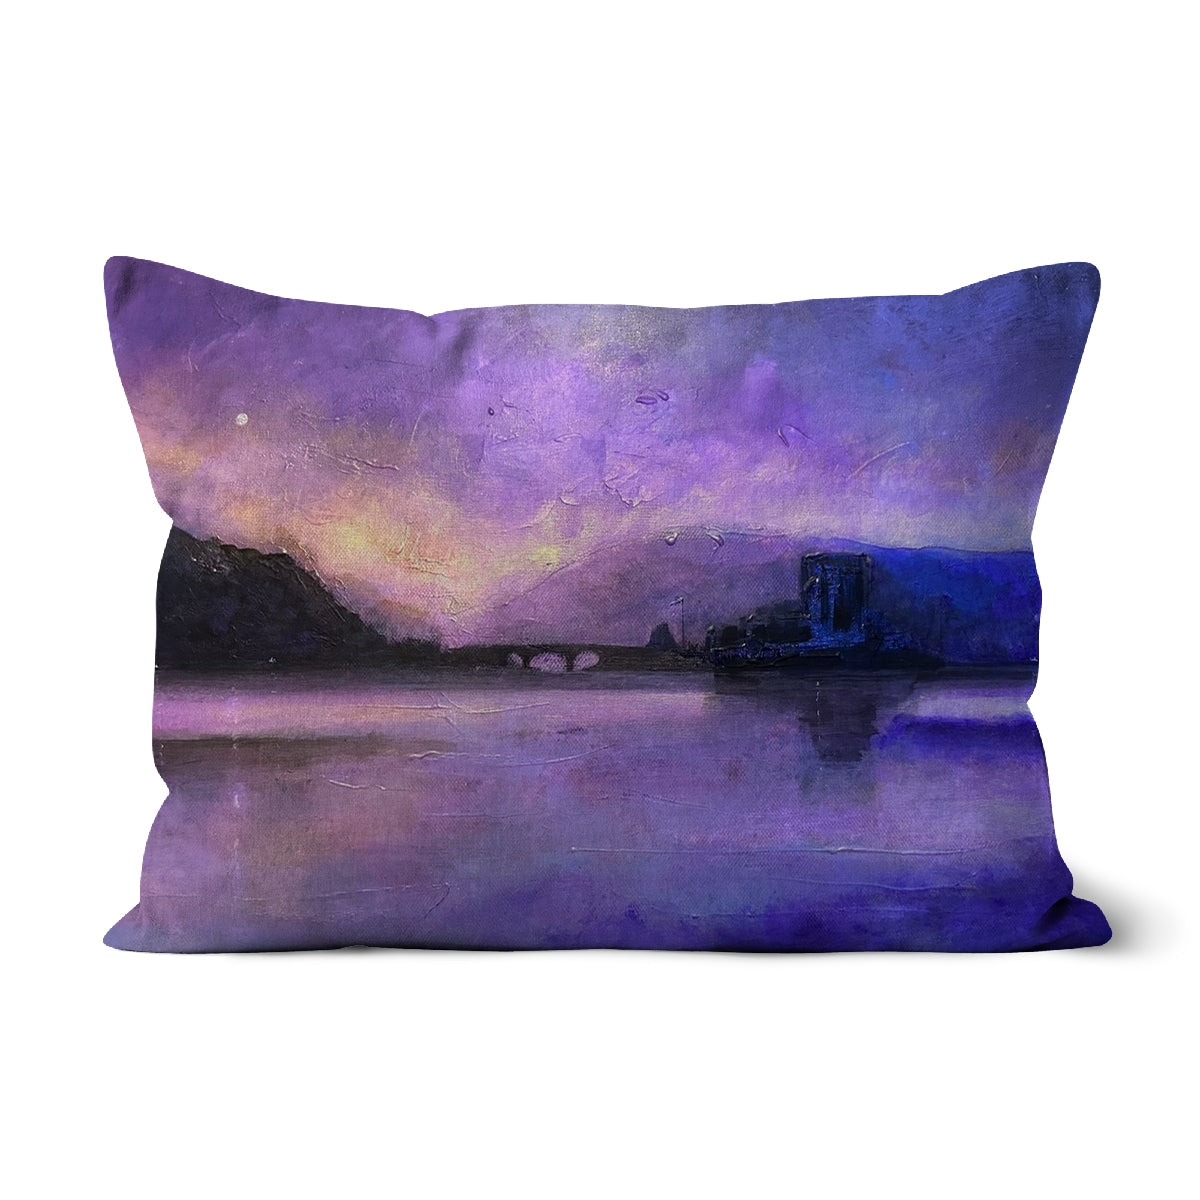 Eilean Donan Castle Moonset Art Gifts Cushion-Cushions-Historic & Iconic Scotland Art Gallery-Linen-19"x13"-Paintings, Prints, Homeware, Art Gifts From Scotland By Scottish Artist Kevin Hunter